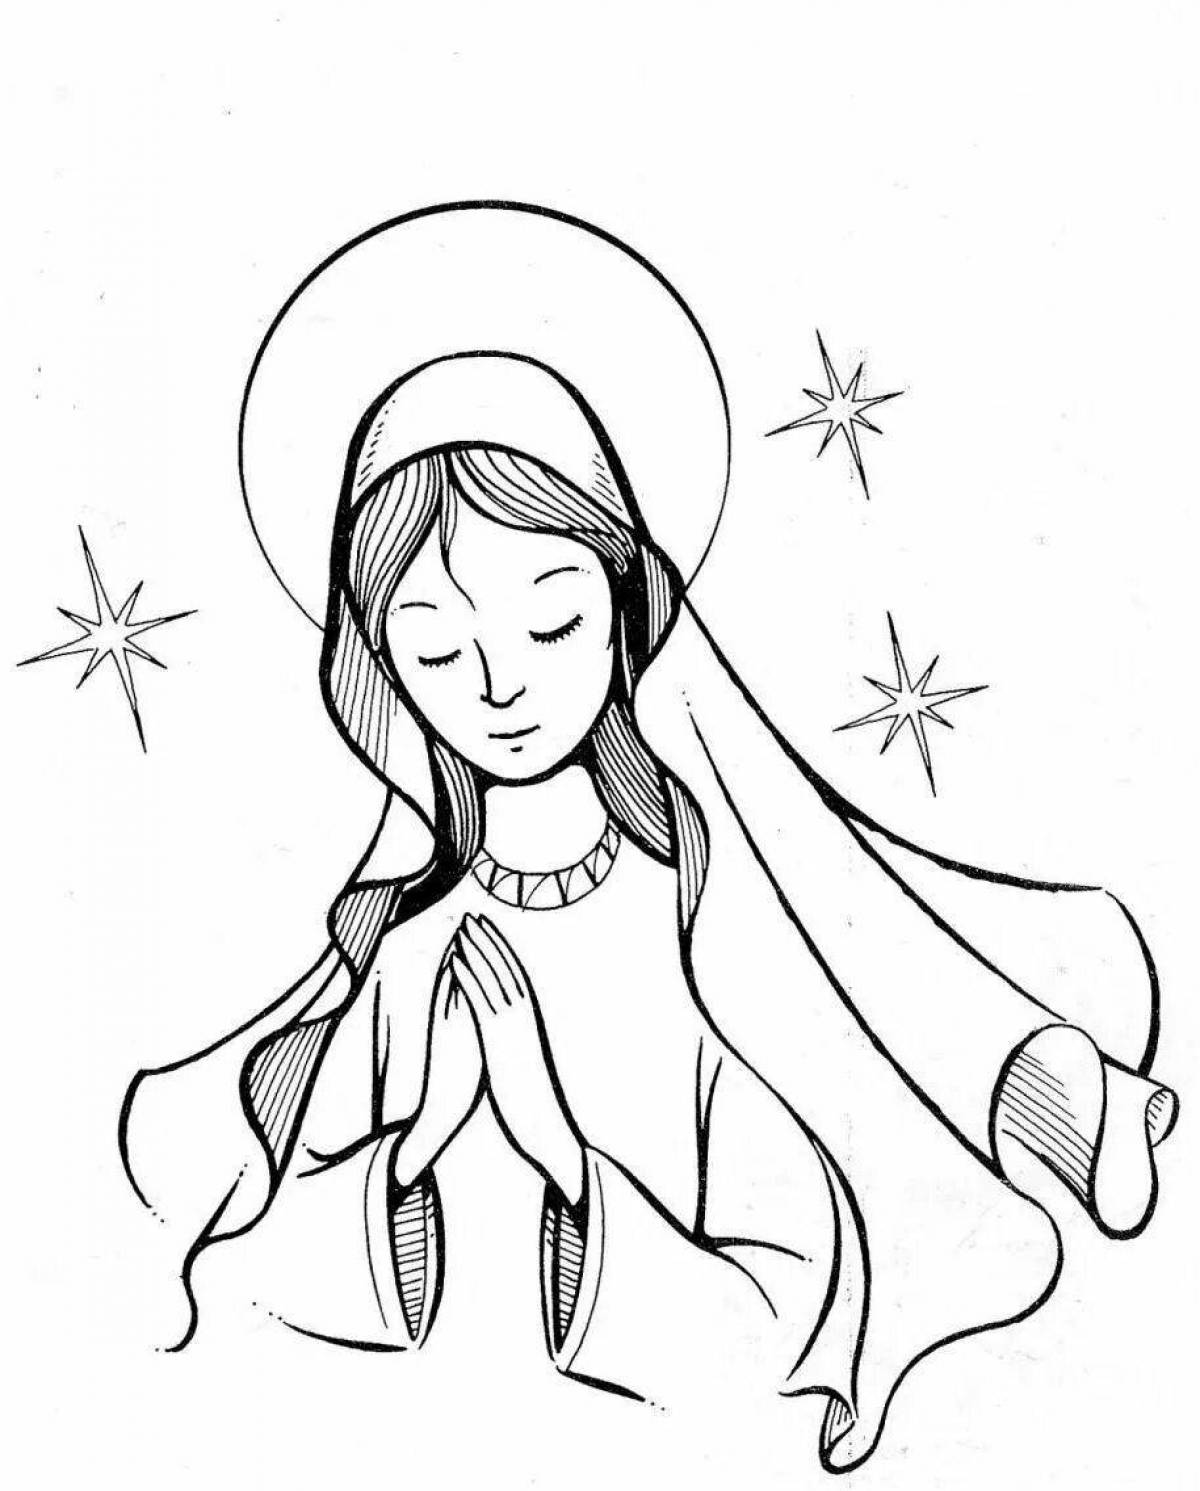 Coloring page charming virgin mary